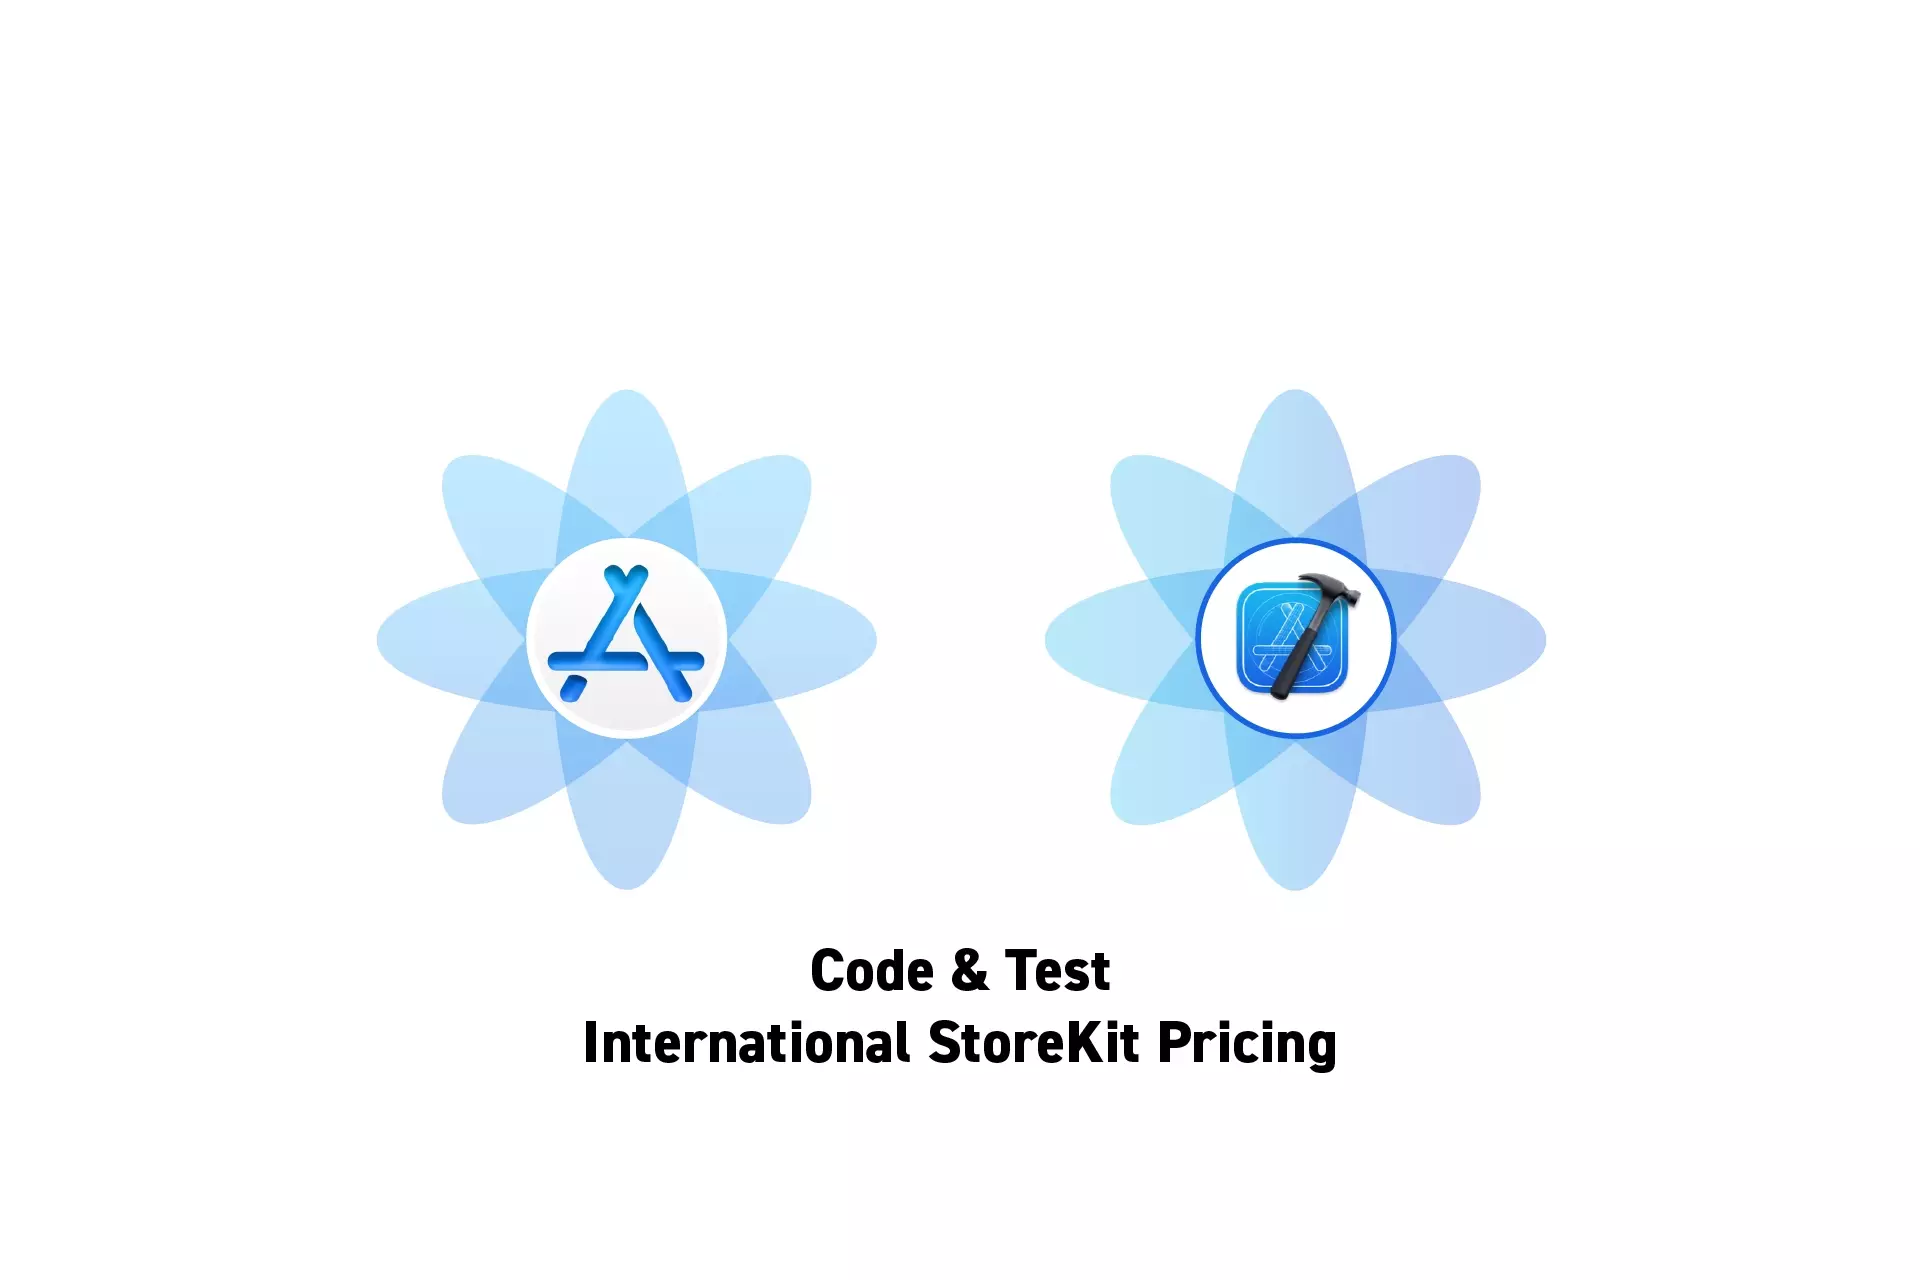 Two flowers that represent StoreKit and XCode side by side. Beneath them sits the text “Code & Test International StoreKit Pricing.”